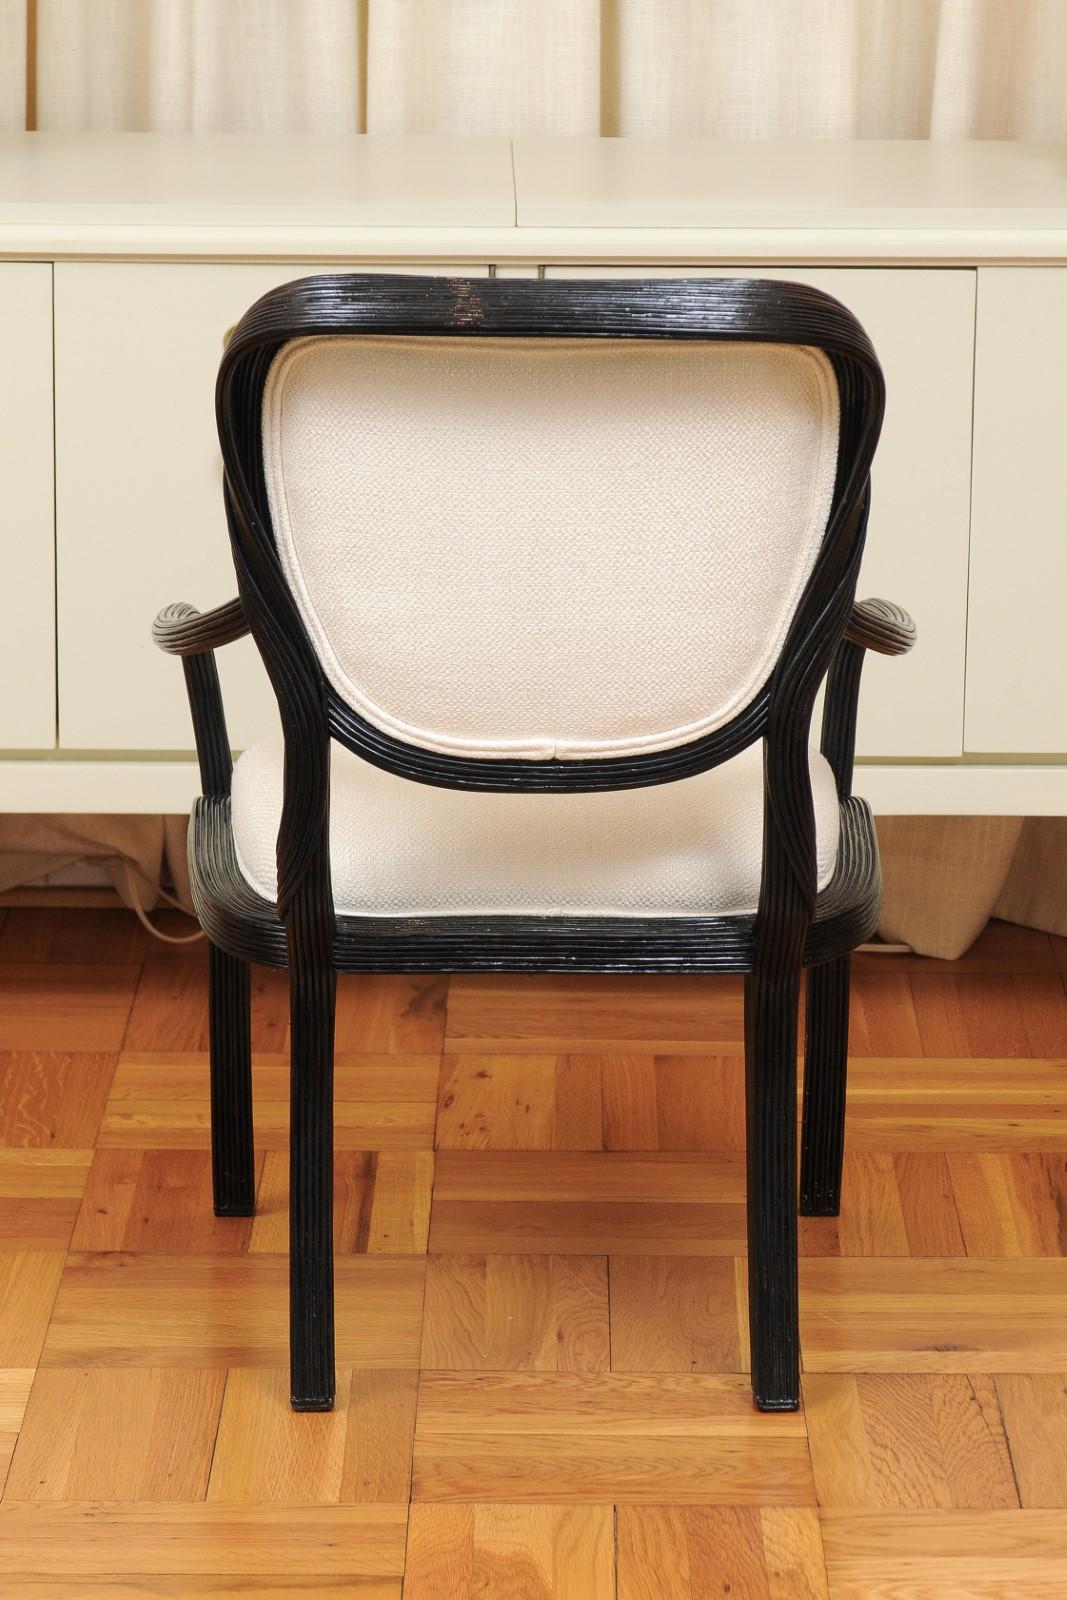 Extraordinary Set of 12 Trompe L'oiel Dining Chairs by Cobonpue, circa 1980 For Sale 9